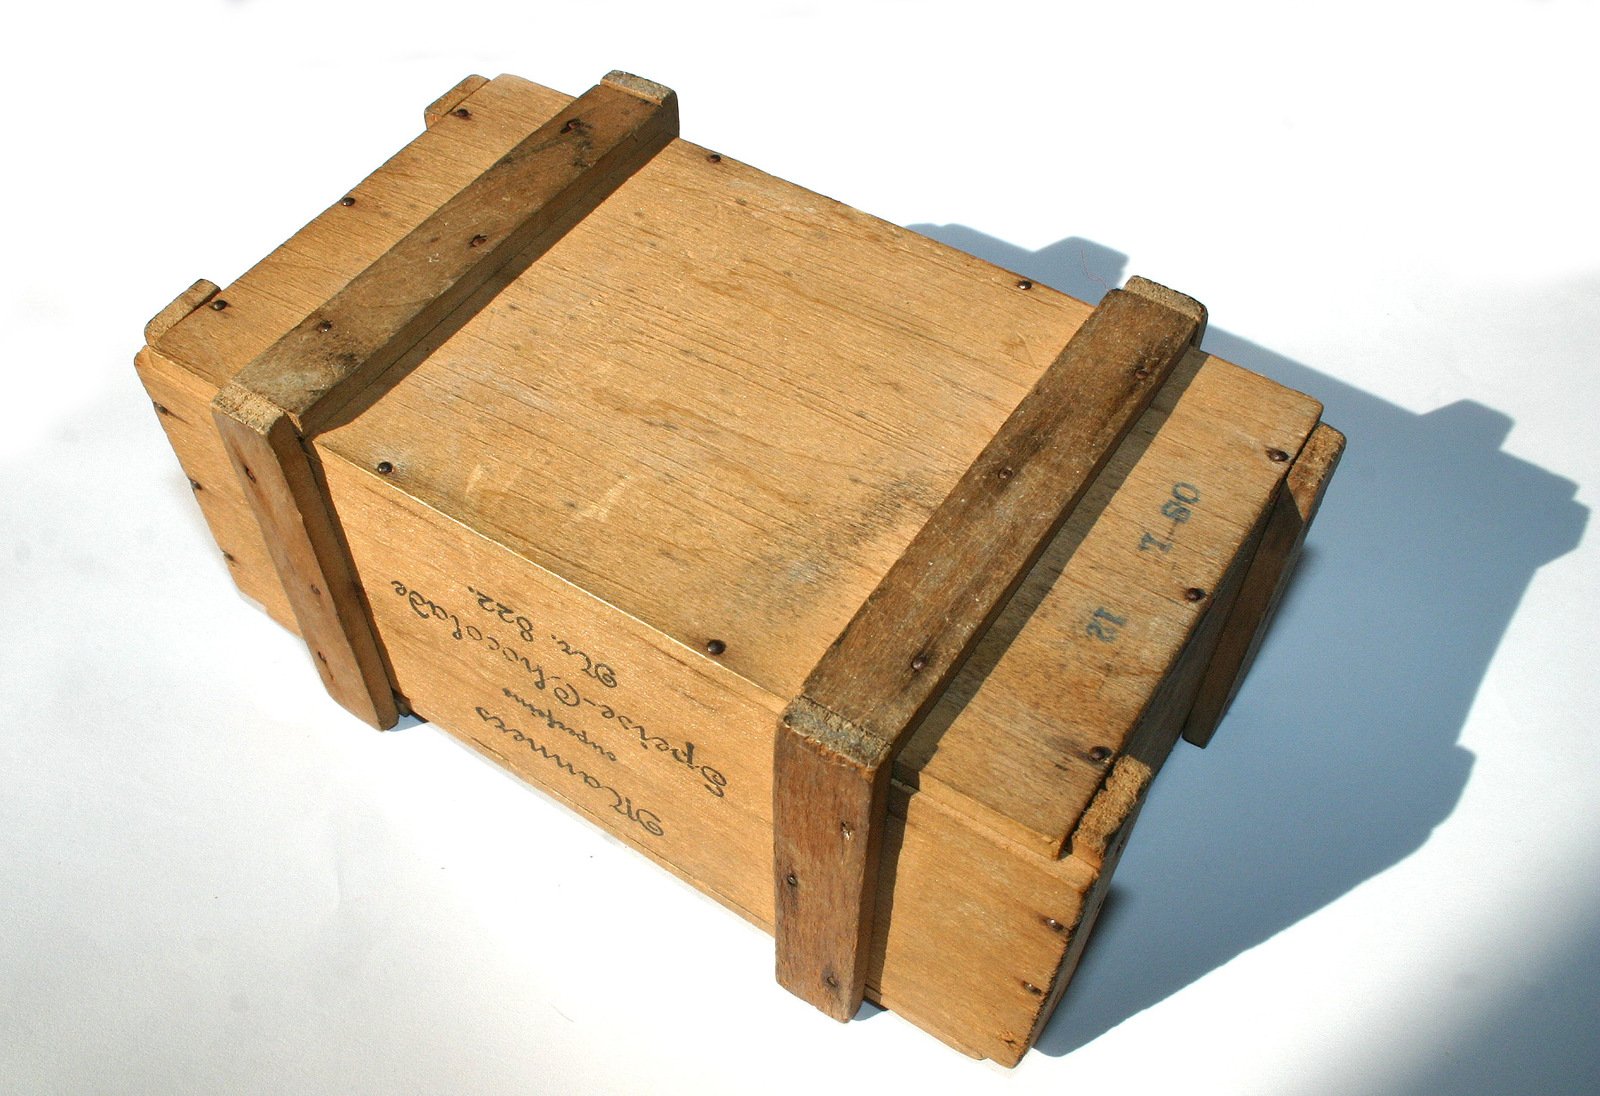 a wooden box with some words on it